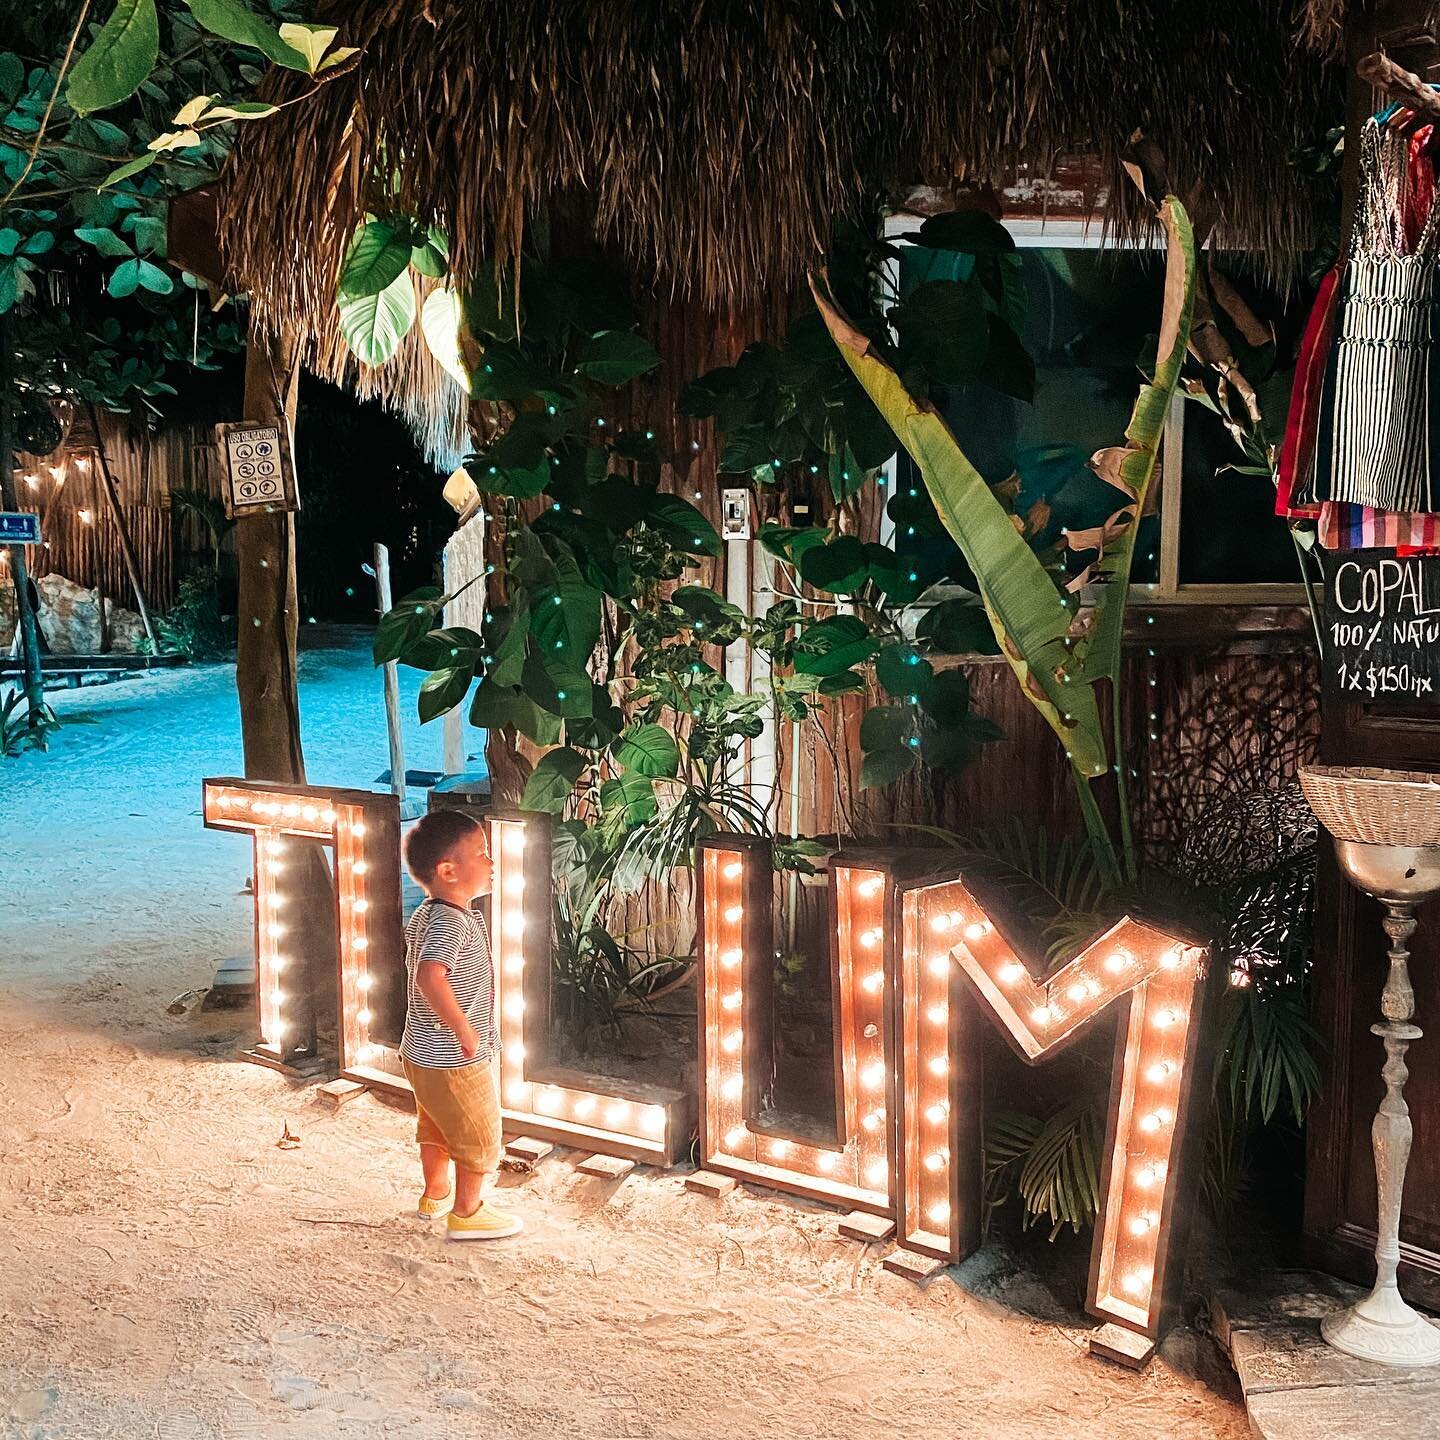 Looking for a letter A.
#aska #tulum #mexico #メキシコ